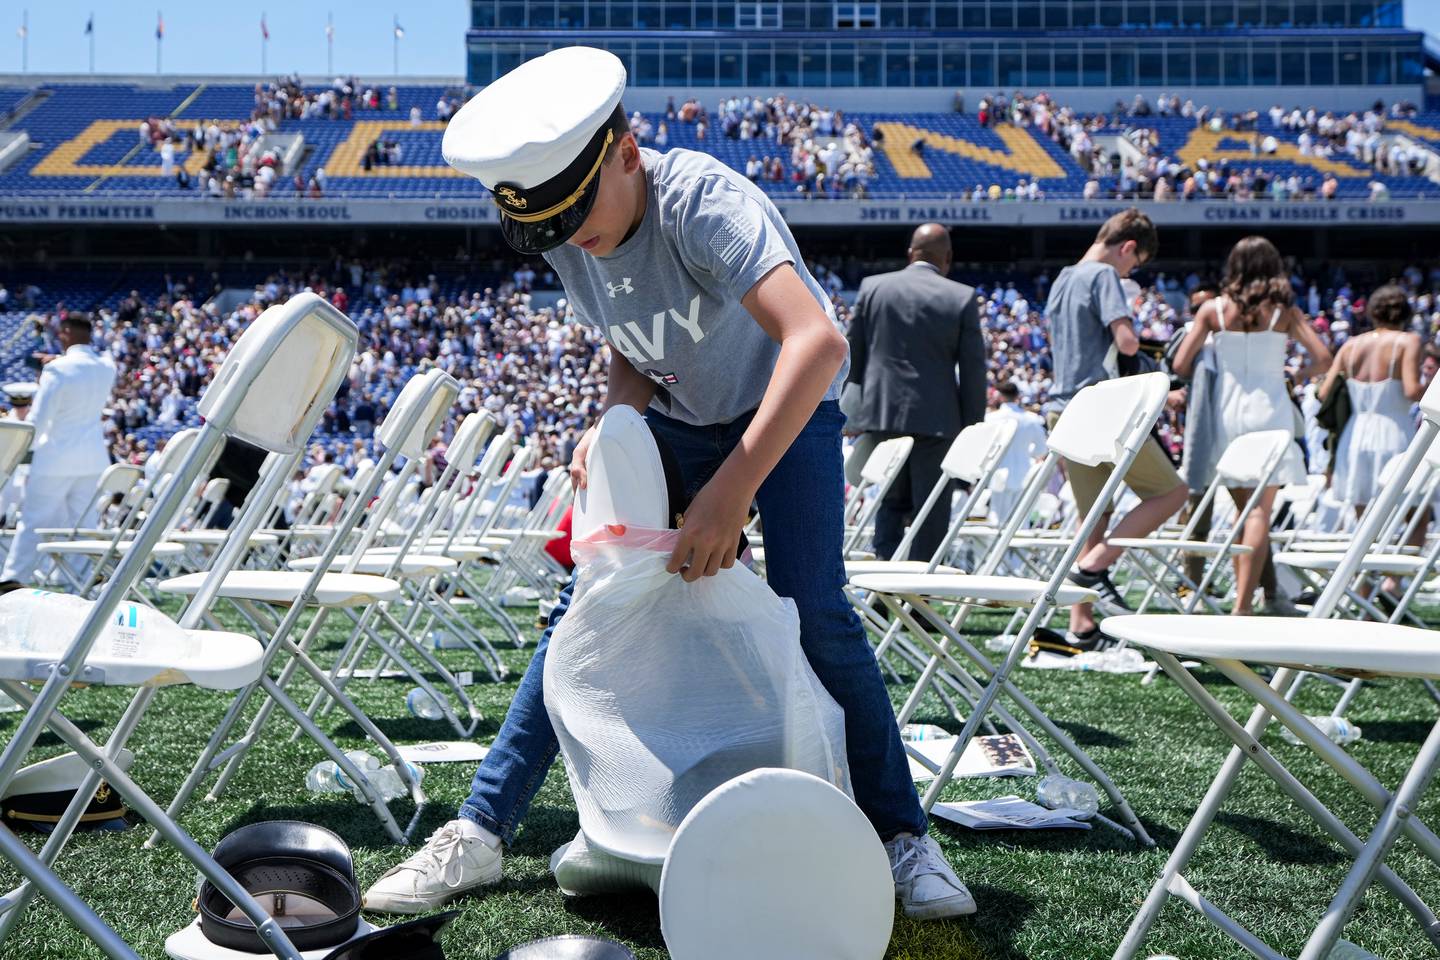 A young child collects discarded covers in a garbage bag at the conclusion of the U.S. Naval Academy’s graduation ceremony at the Navy-Marine Corps Memorial Stadium on May 26, 2023. The graduating midshipmen are commissioned as either an ensign in the U.S. Navy or a 2nd Lieutenant in the U.S. Marine Corps.